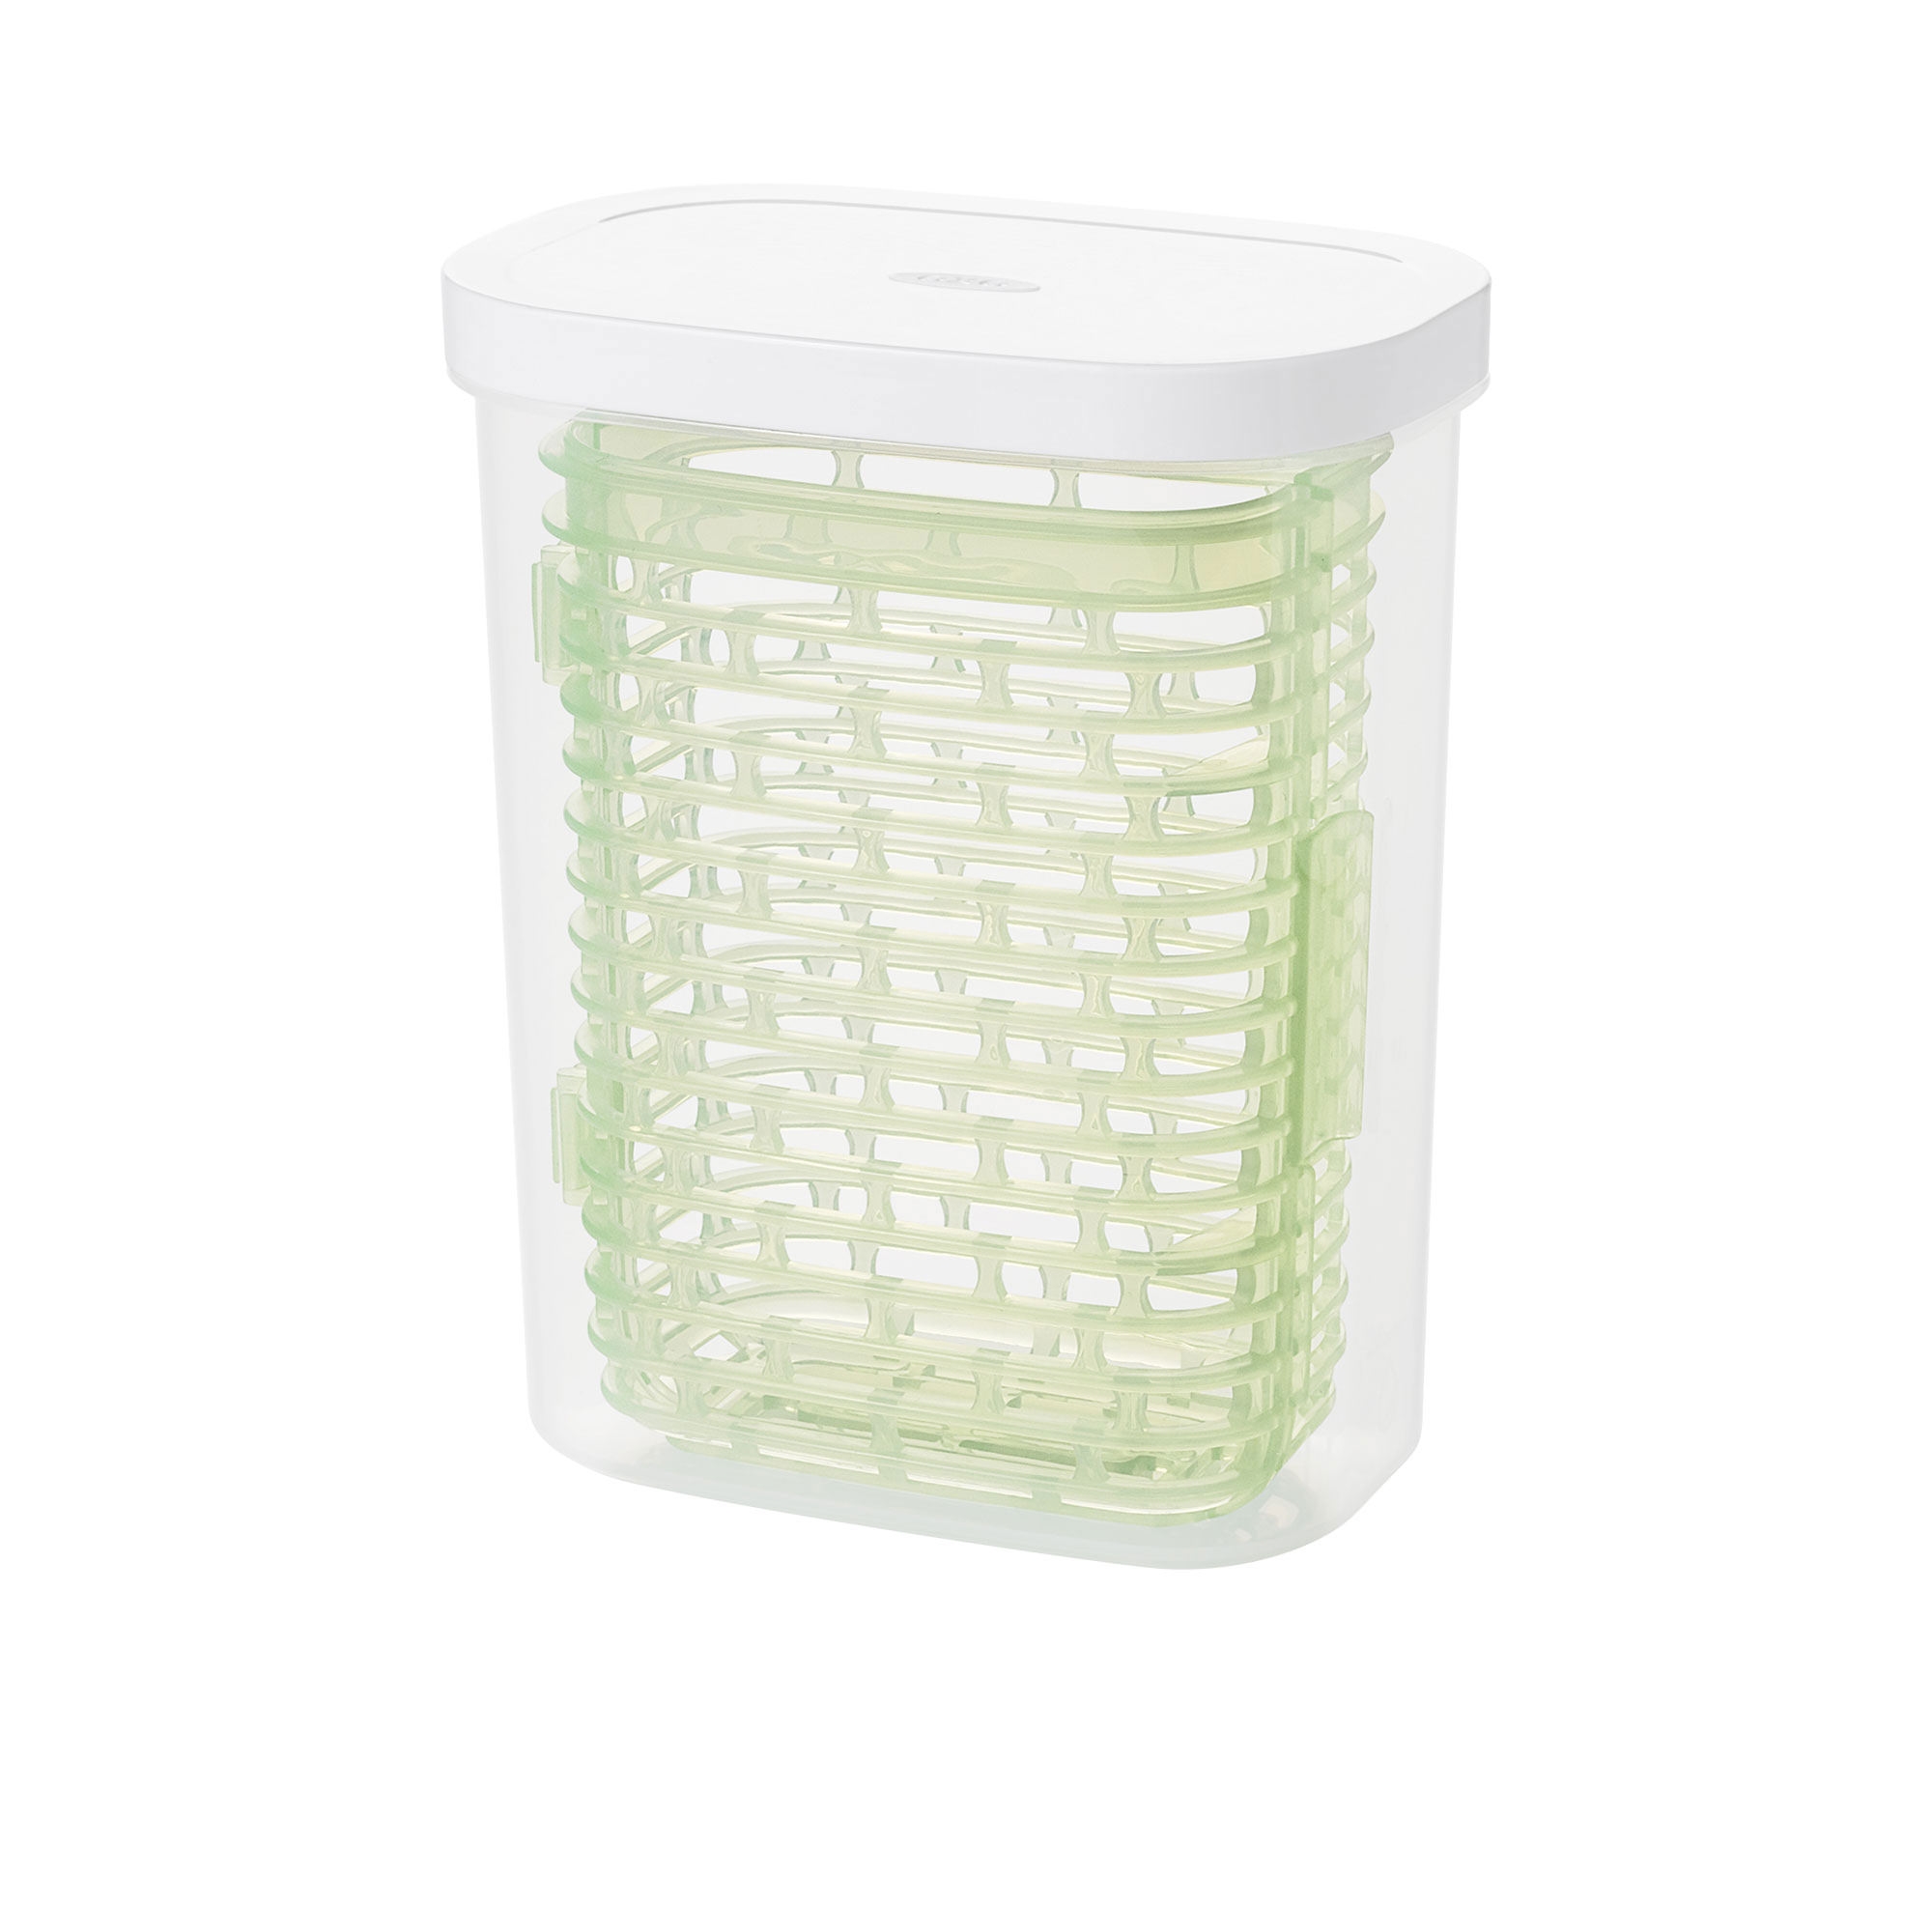 OXO Good Grips GreenSaver Herb Keeper 1.7L Image 1